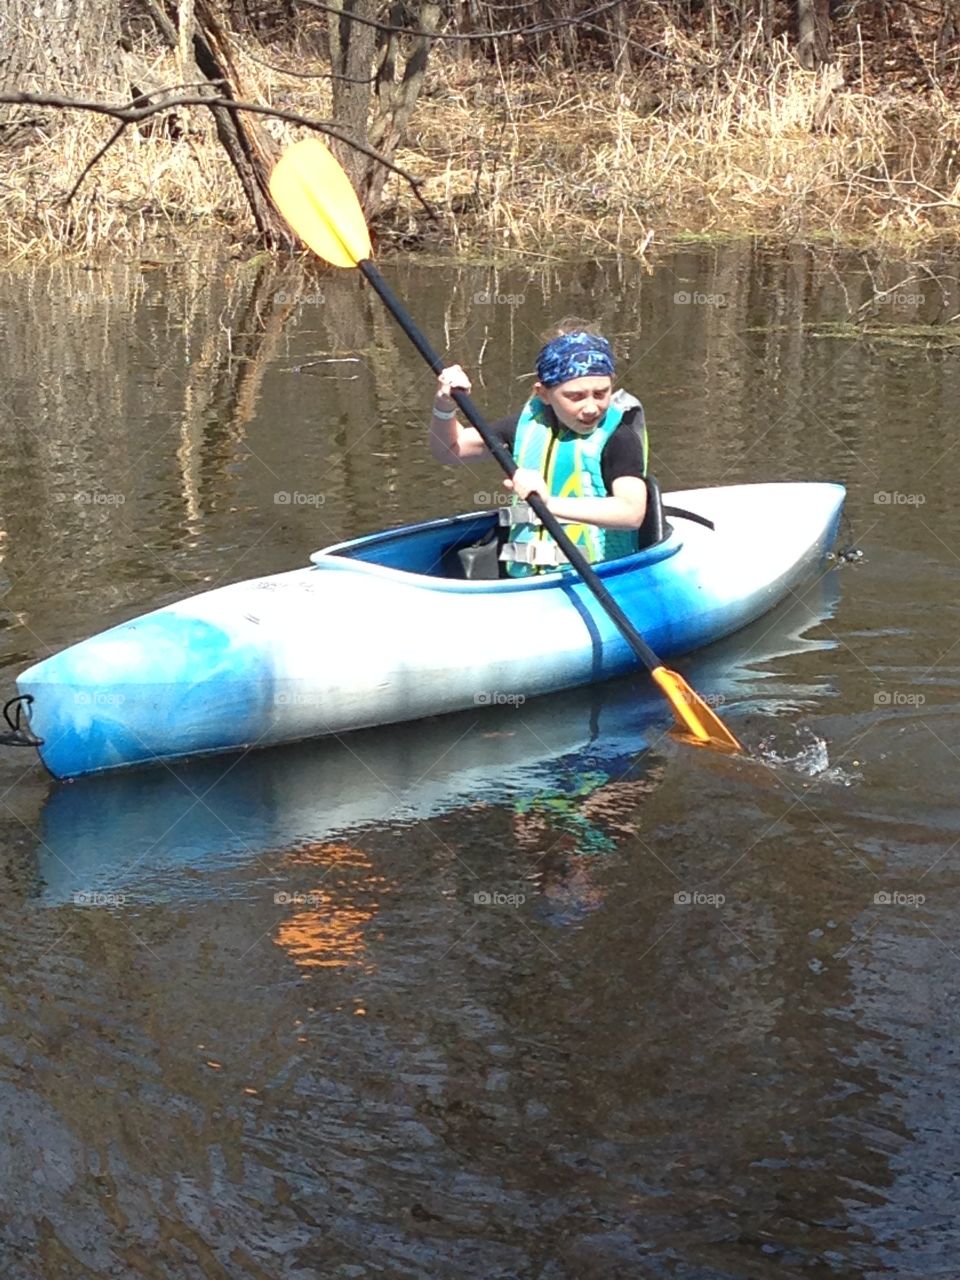 Kayaking Solo. Daughter wanted to try daddy's kayak. She figured it out quick! And look, she's even sporting her Buff!